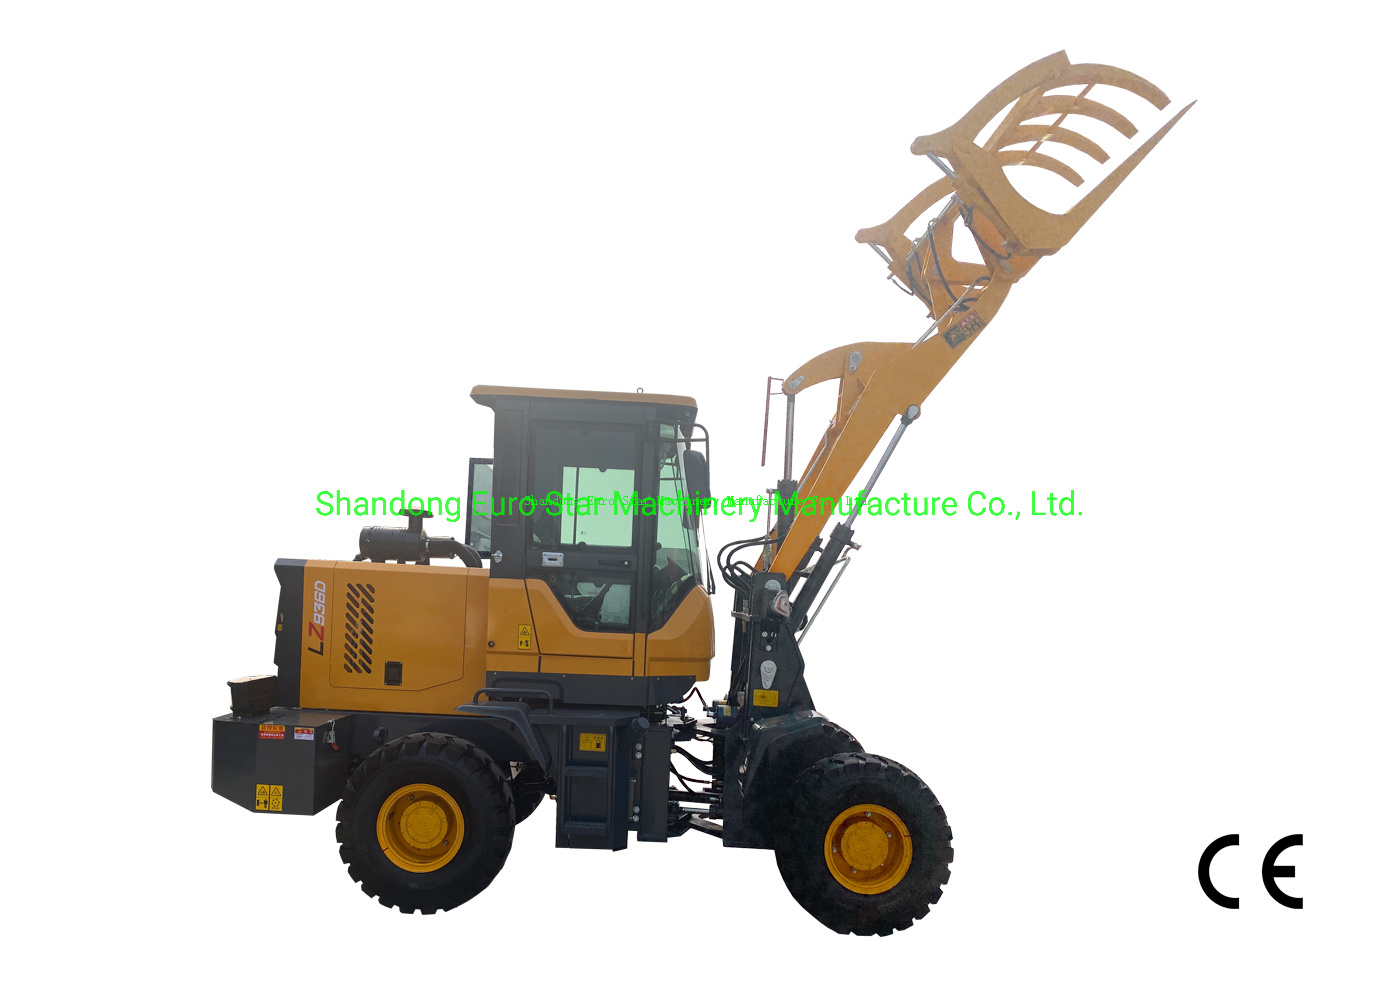 1-6t-Ez936-Wheel-Loader-Multi-Functional-Mini-Small-CE-Approved-China-Farm-Construction-Medium-Bucket-Machinery-Compact-Backhoe-Excavator-Front-End-Loader.jpg